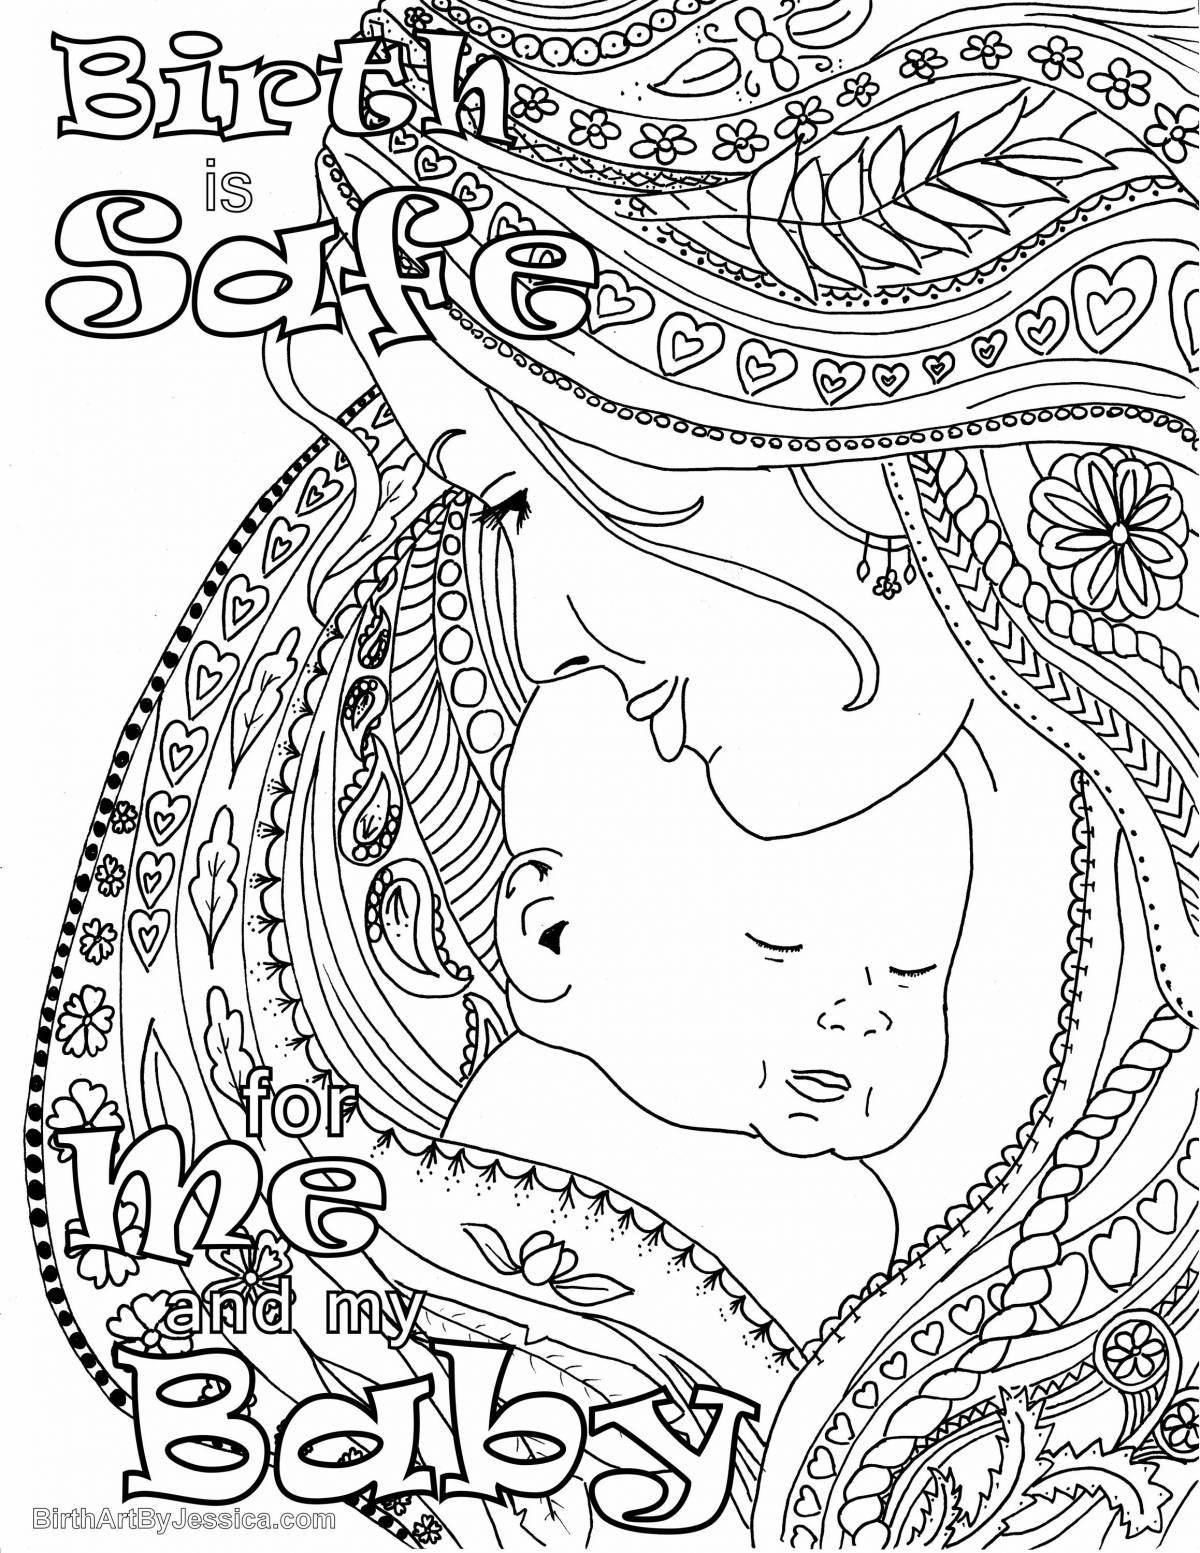 Exquisite maternity coloring book